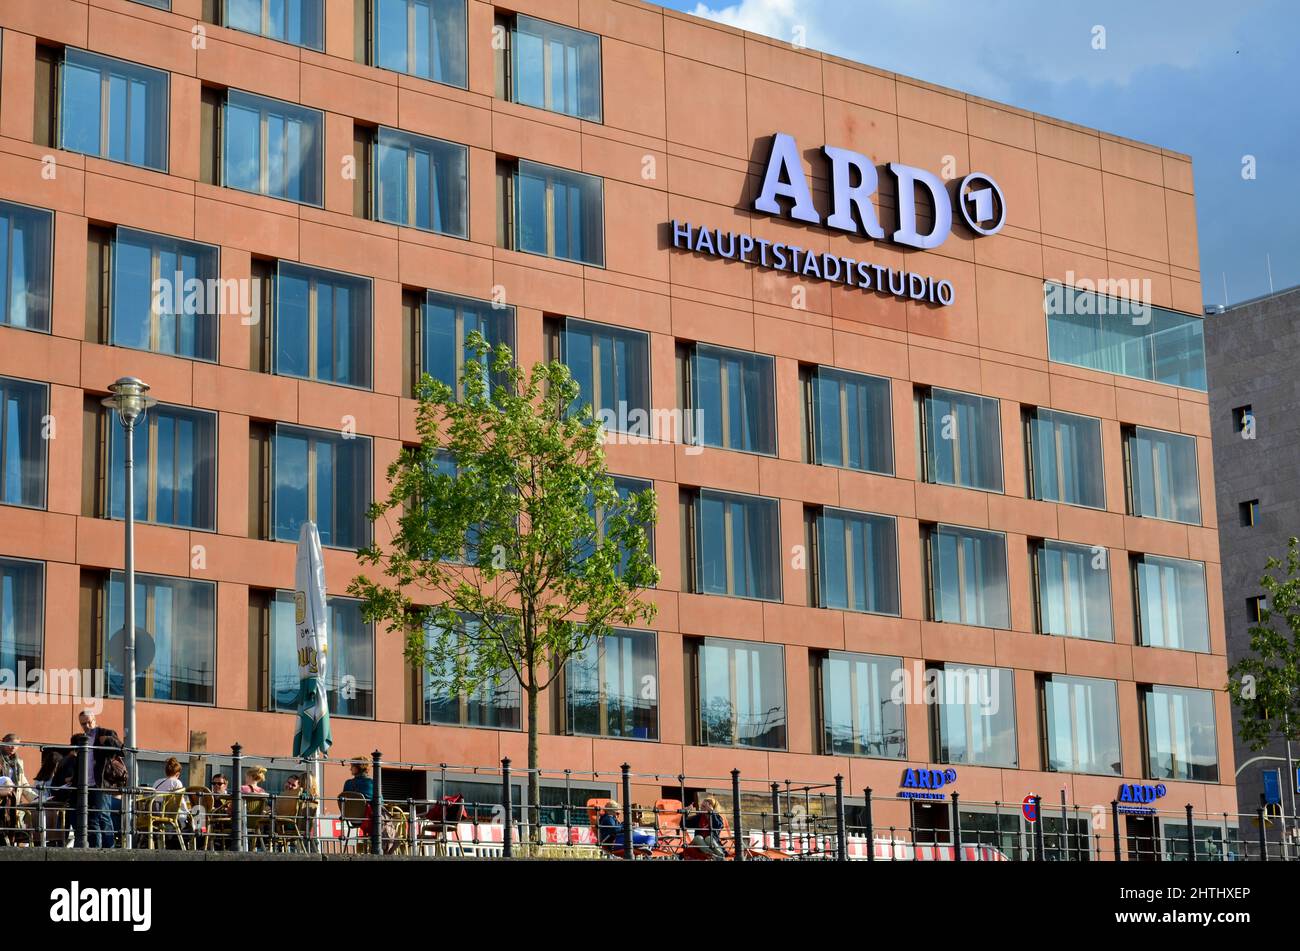 Berlin, Berlin, Germany - June 20 2014: The red ARD capital studio building in Berlin with its many windows Stock Photo